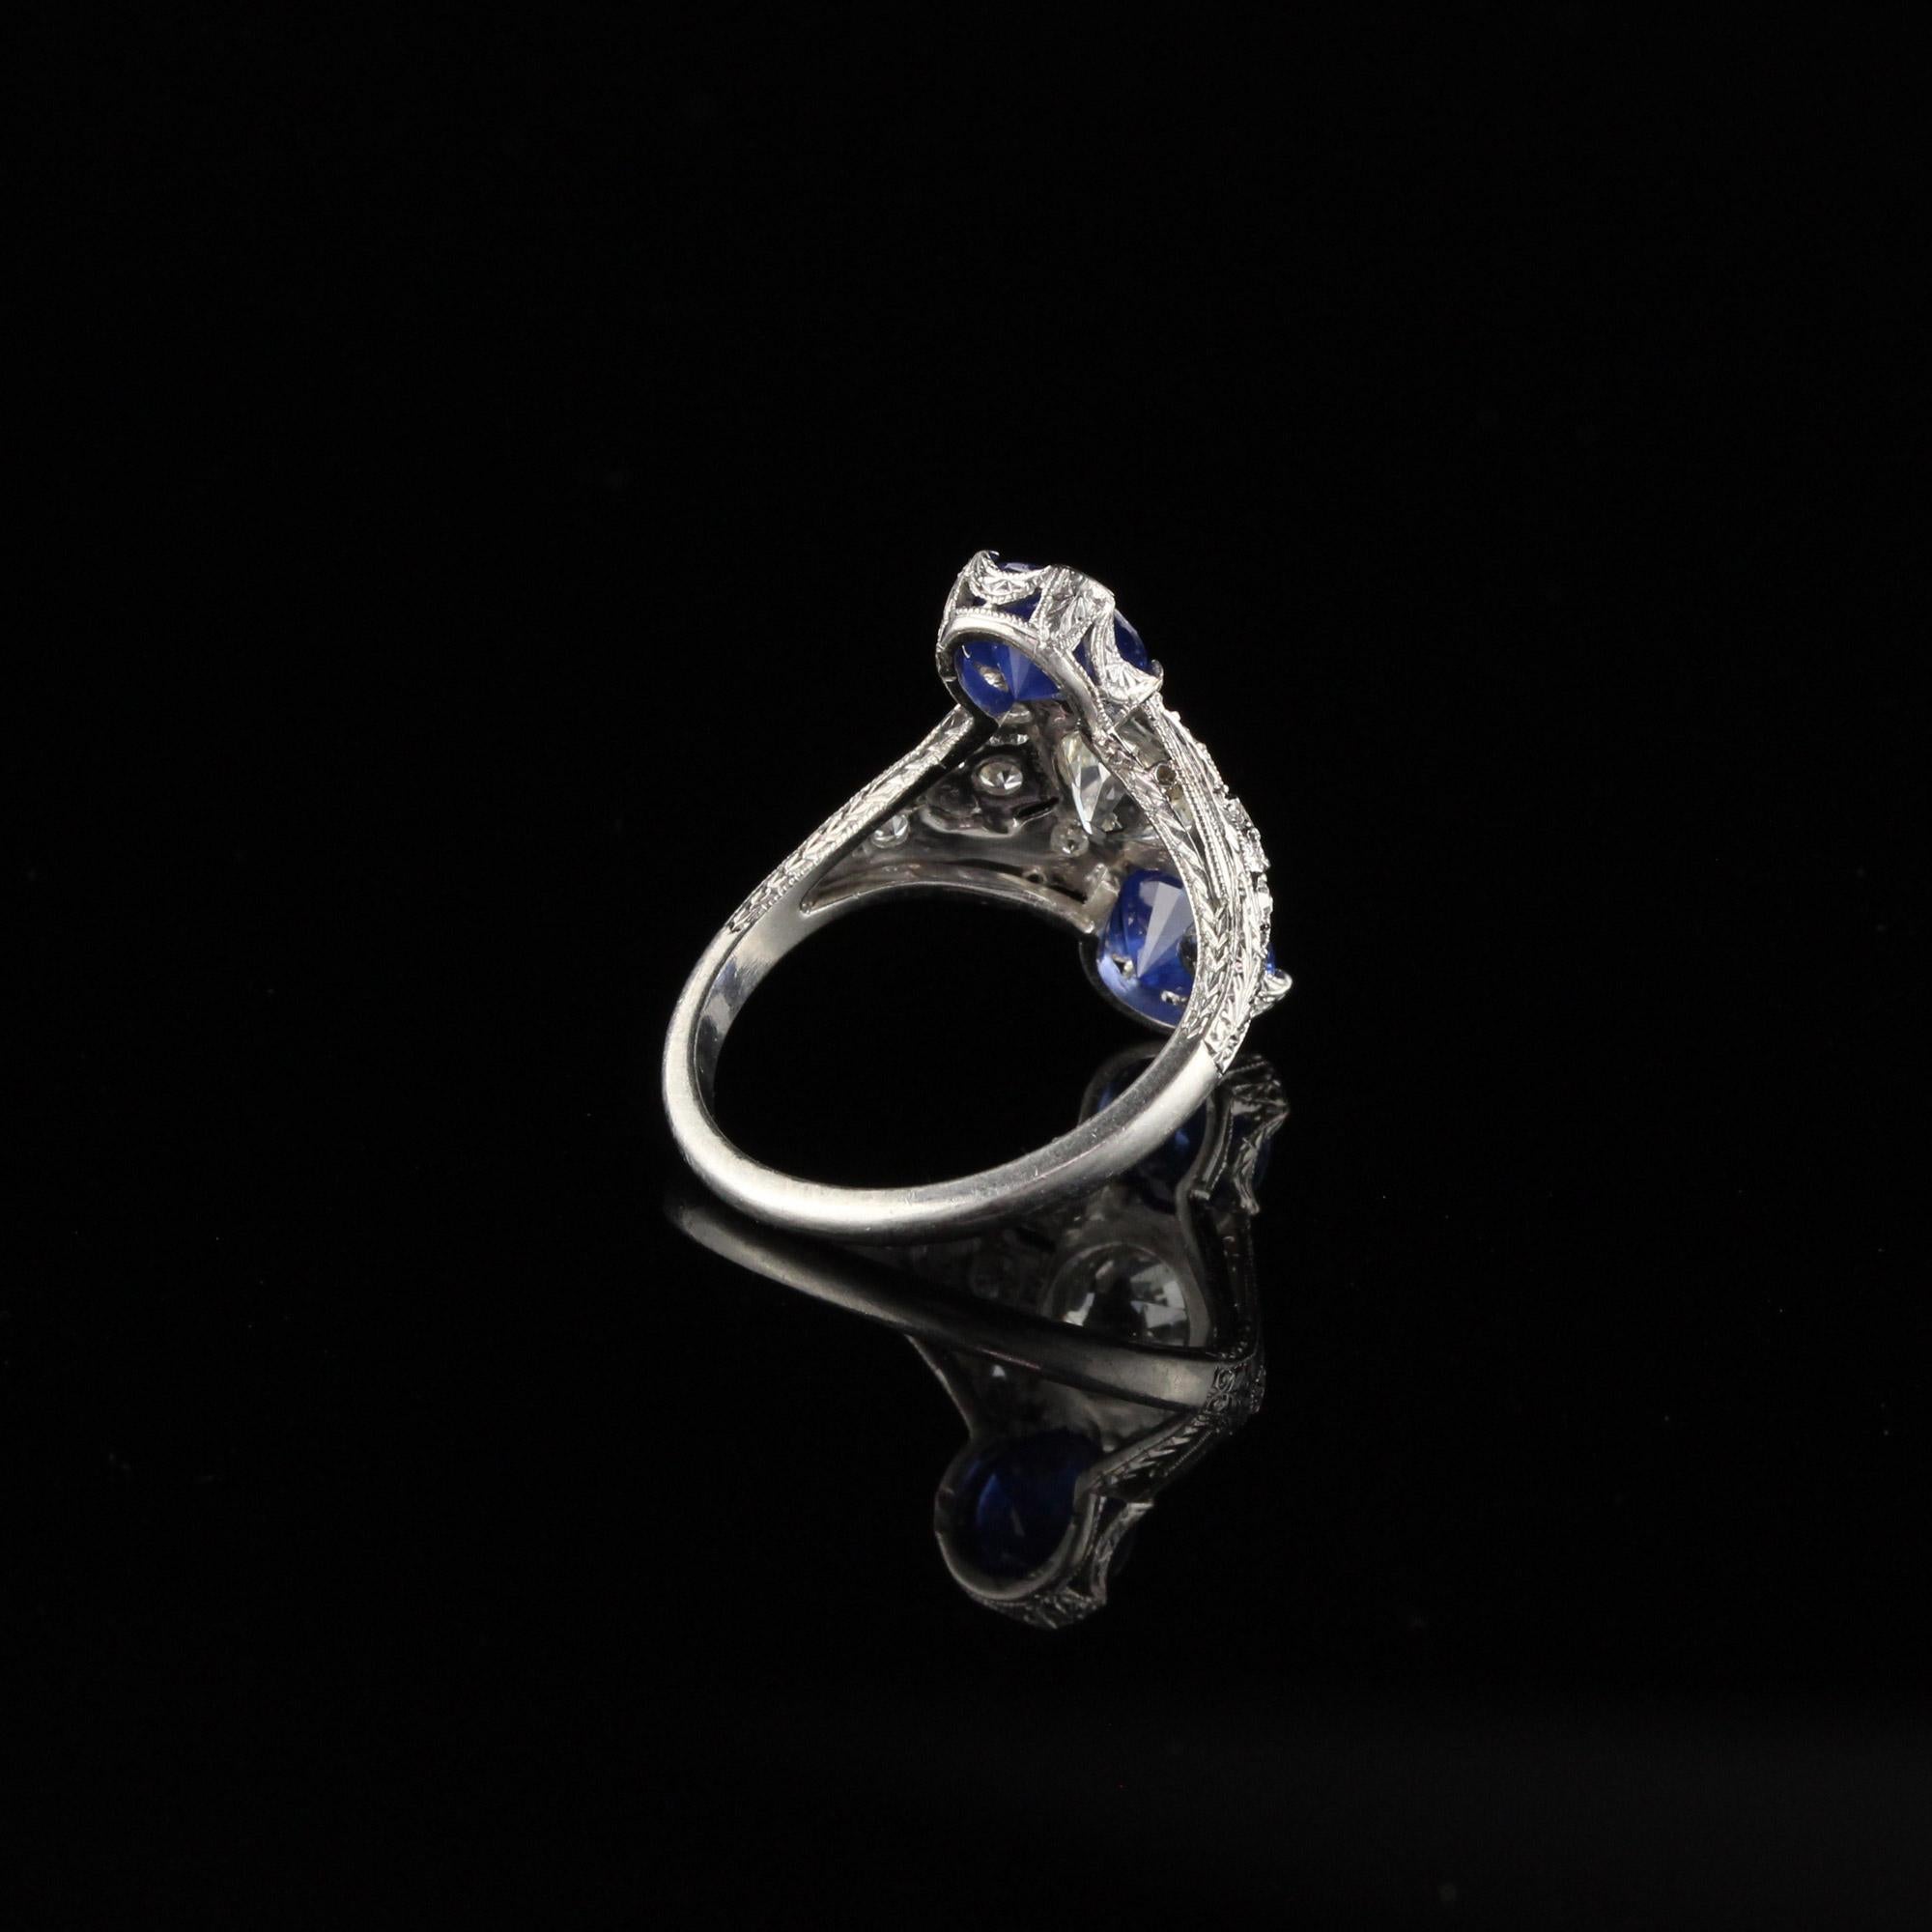 Antique Edwardian Platinum Diamond and Sapphire Shield Ring In Good Condition For Sale In Great Neck, NY